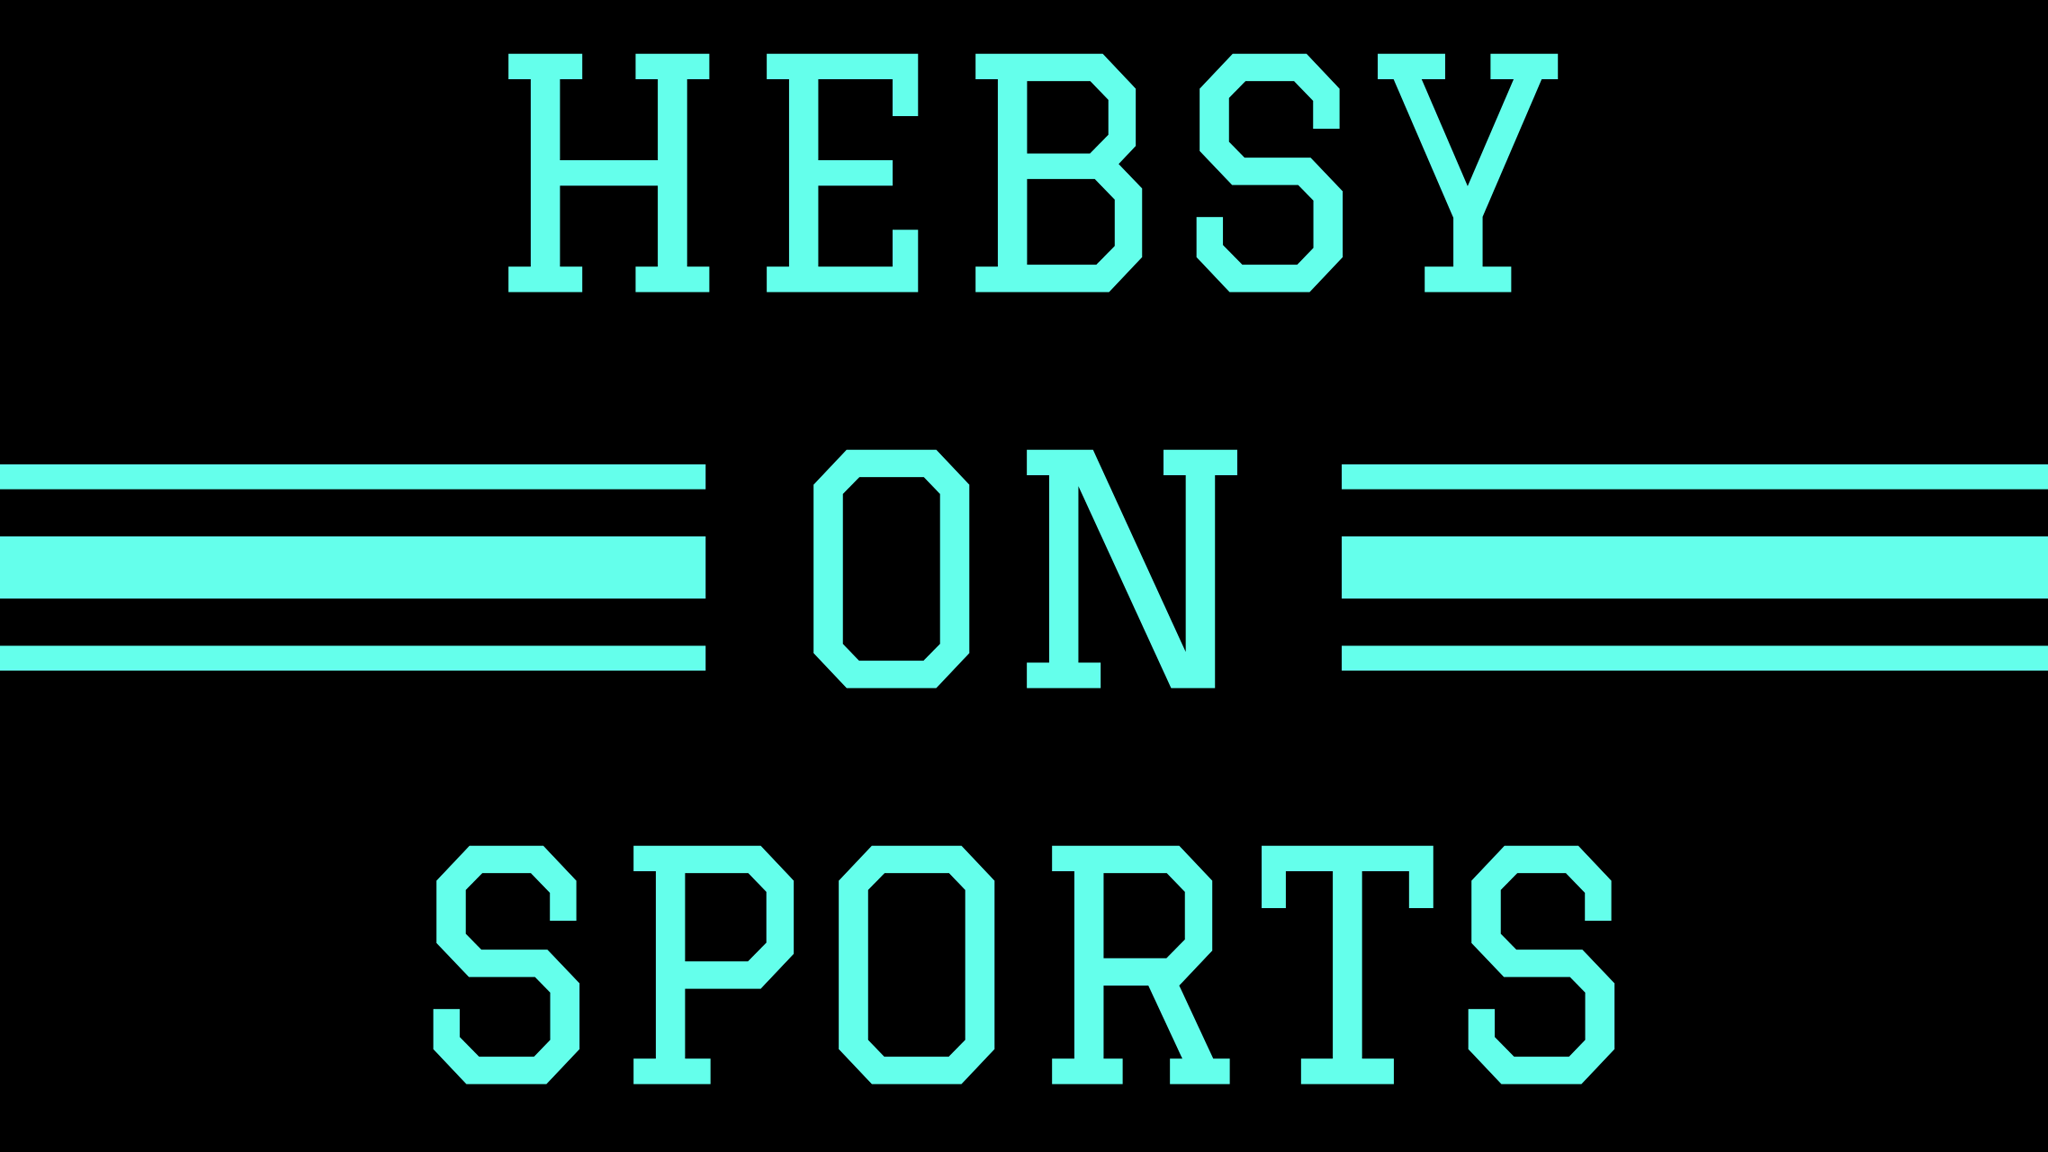 Hebsy on Sports for November 26, 2021